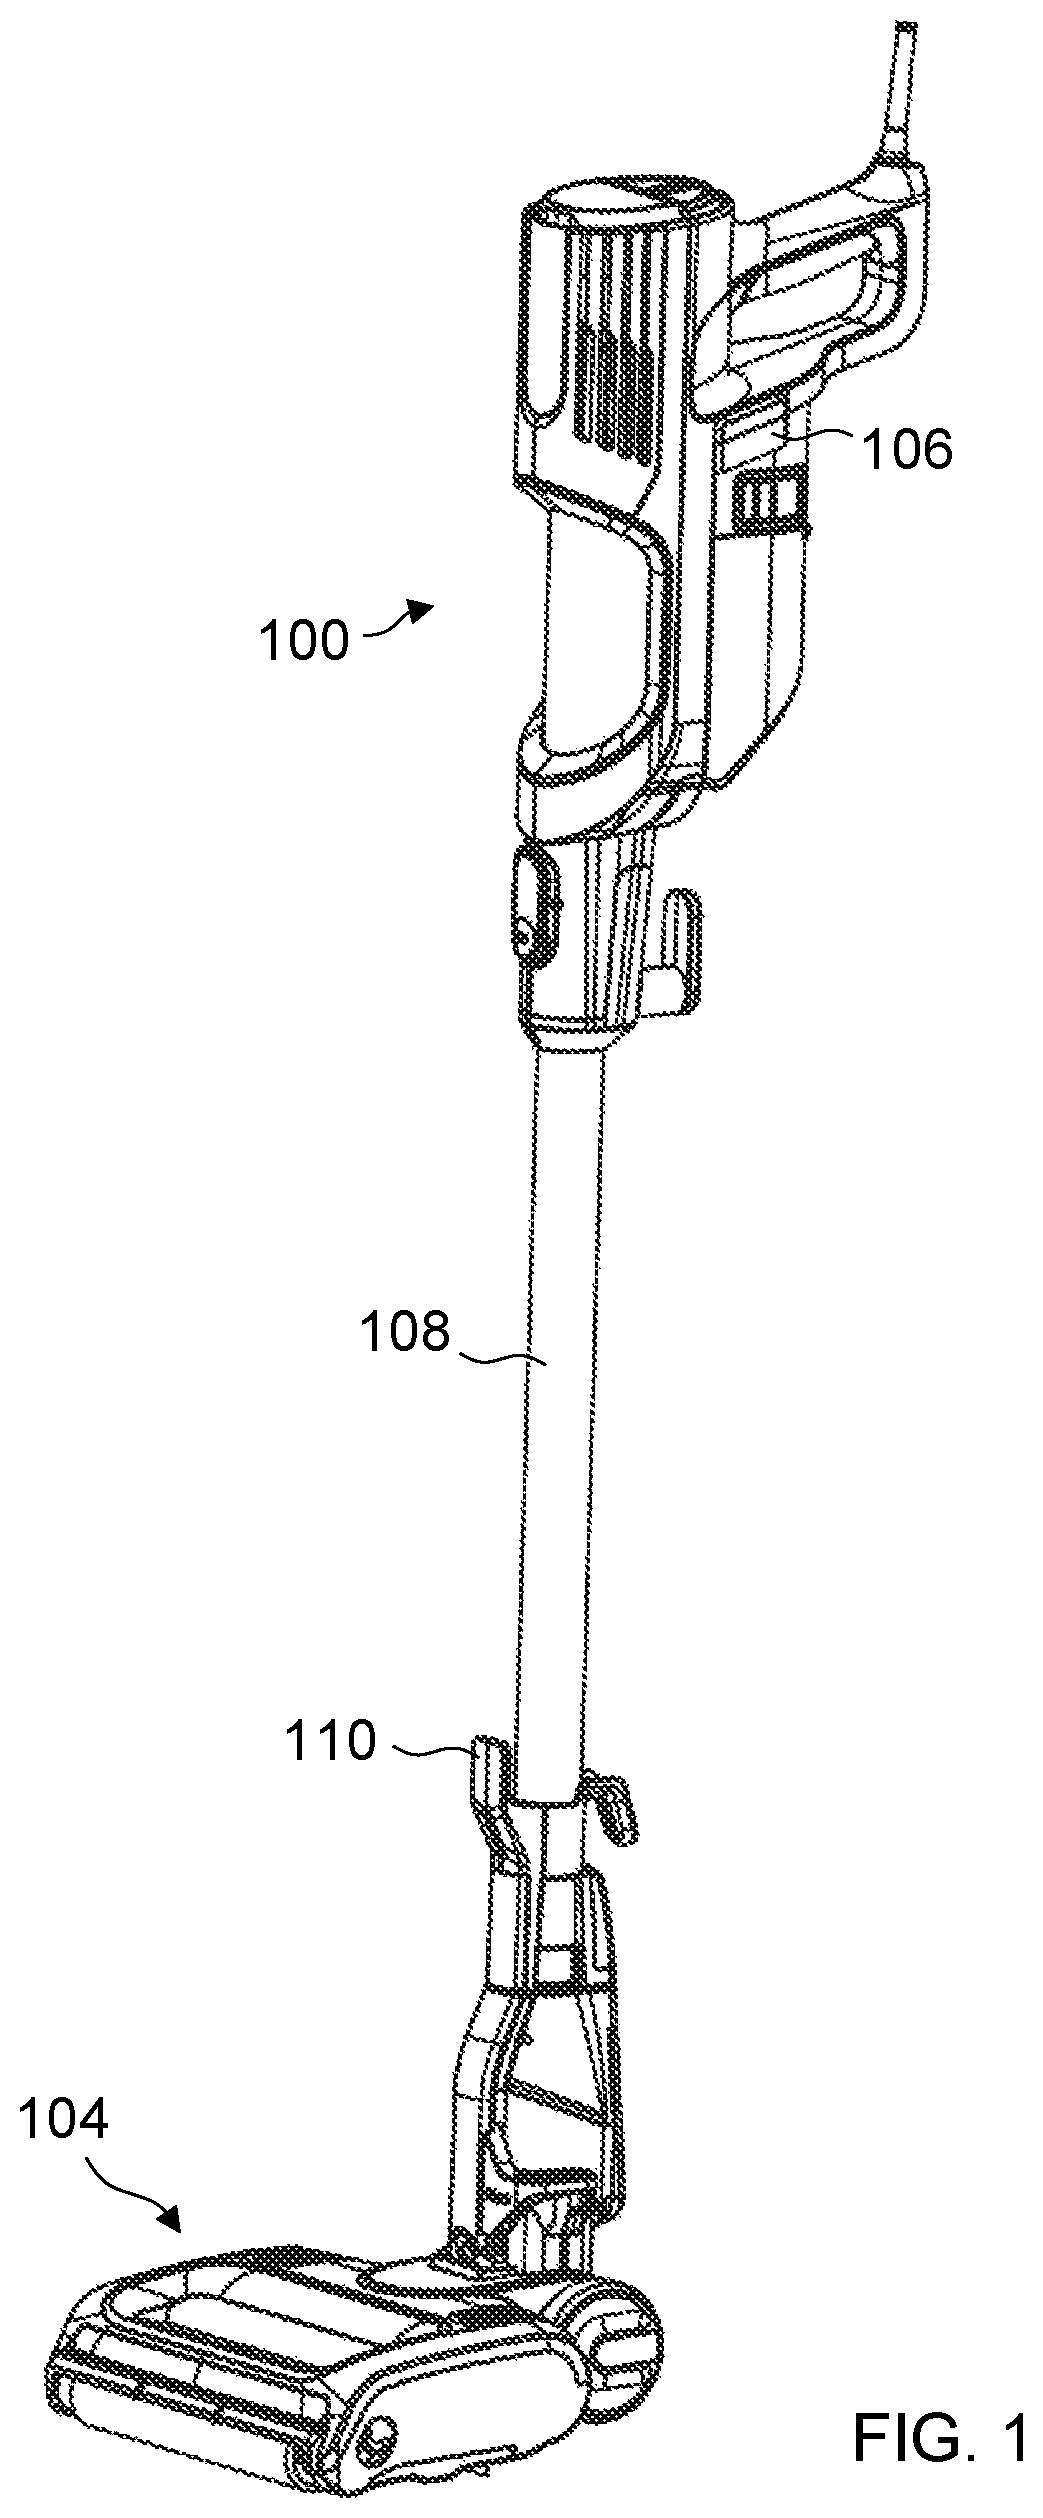 Surface cleaning apparatus with removable air treatment member assembly